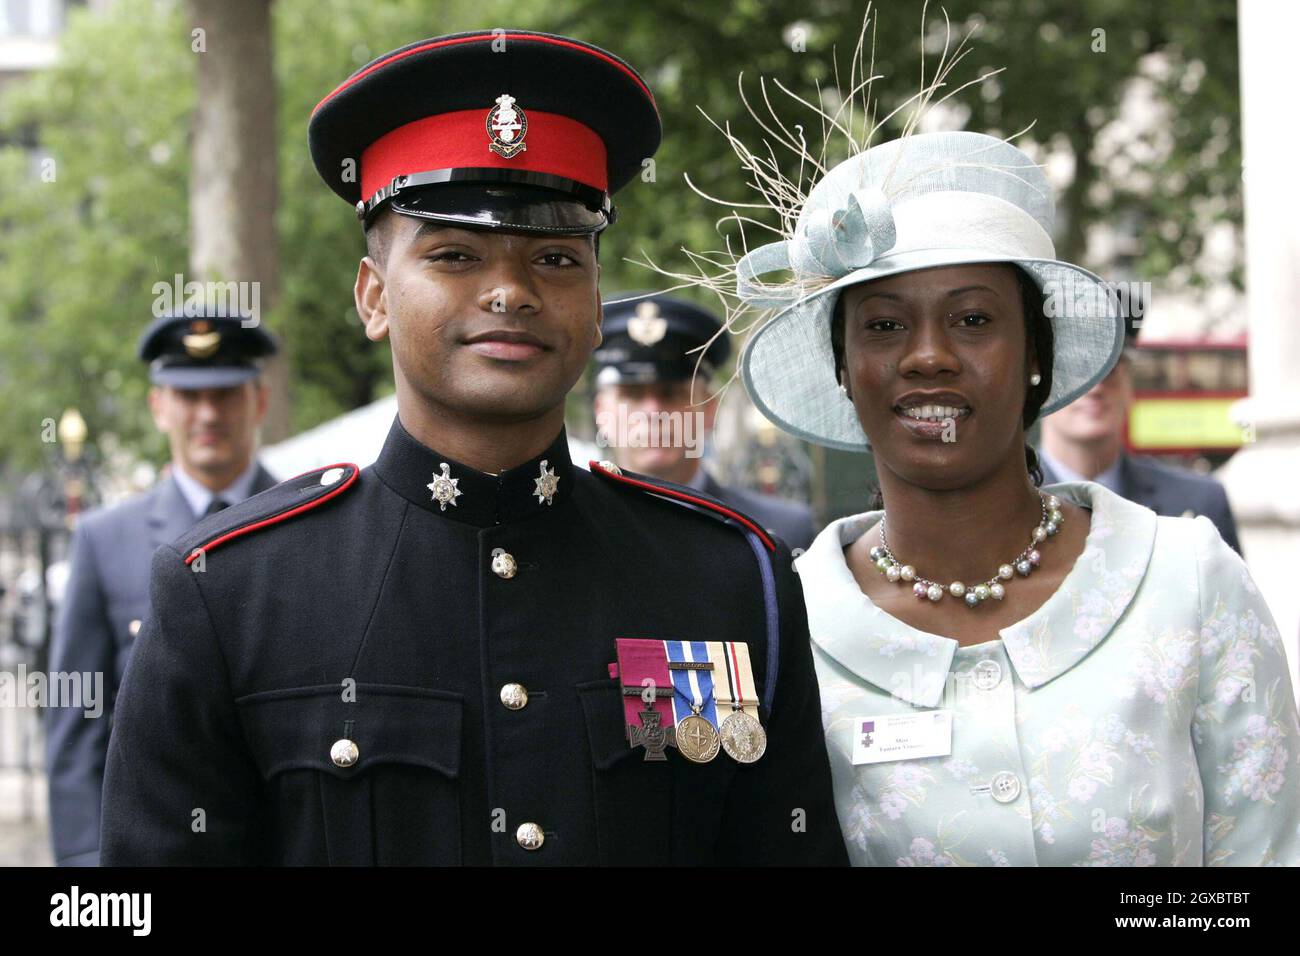 Private Johnson Beharry, who recently received a Victoria Cross, attends with his partner. Stock Photo